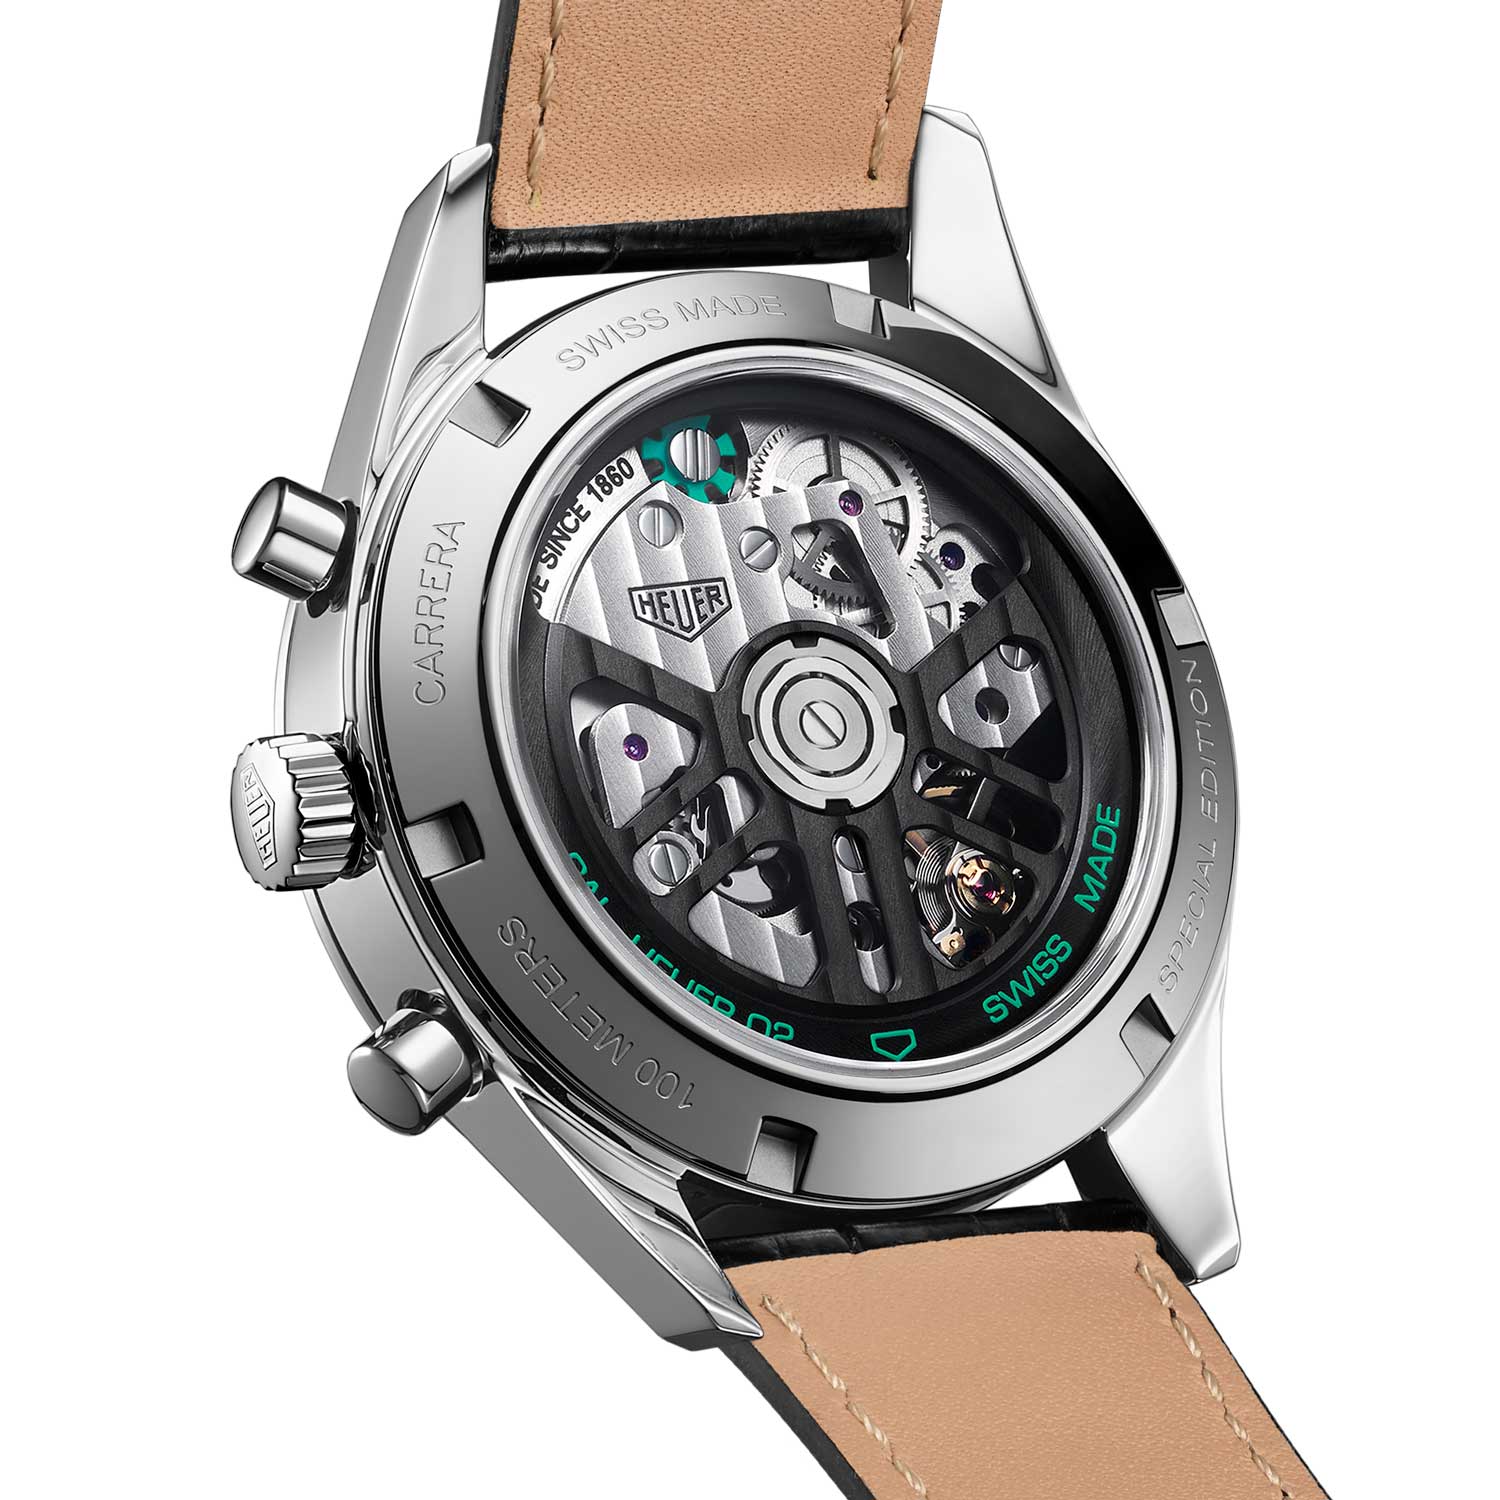 The caseback features interesting green elements that are playful and pleasing to the eye.